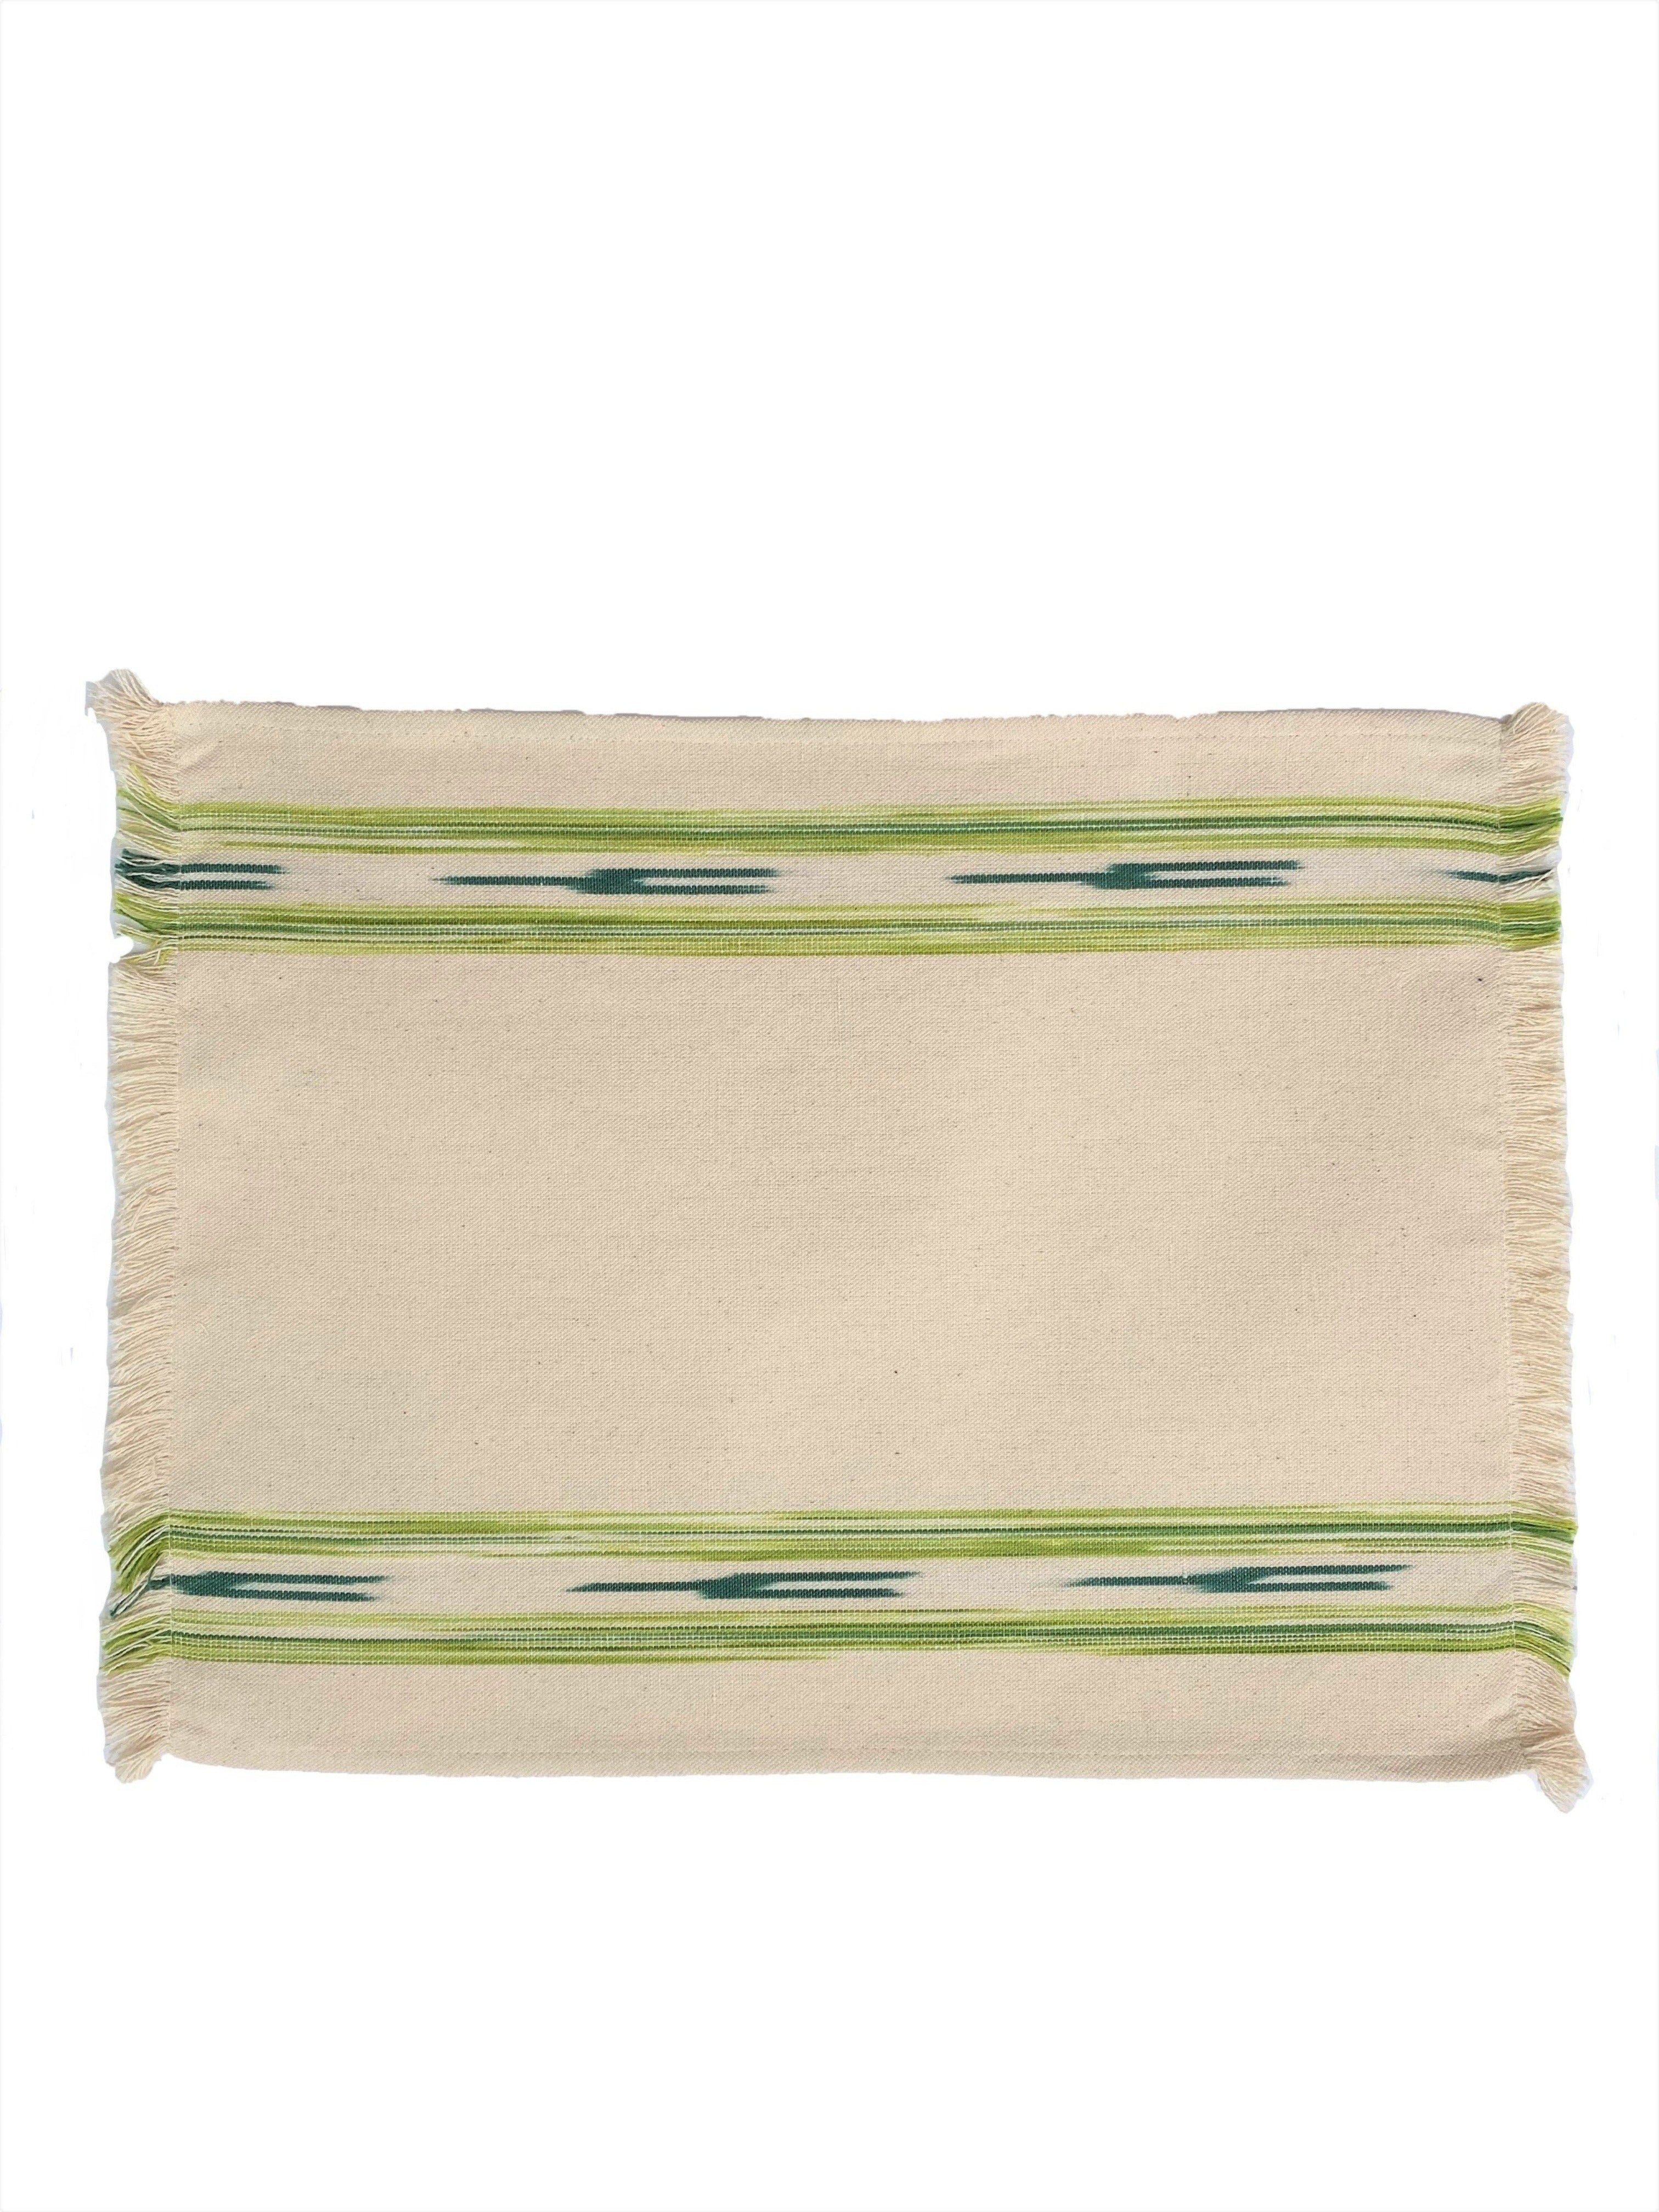 Cream fabric placemat with green ikat stripe